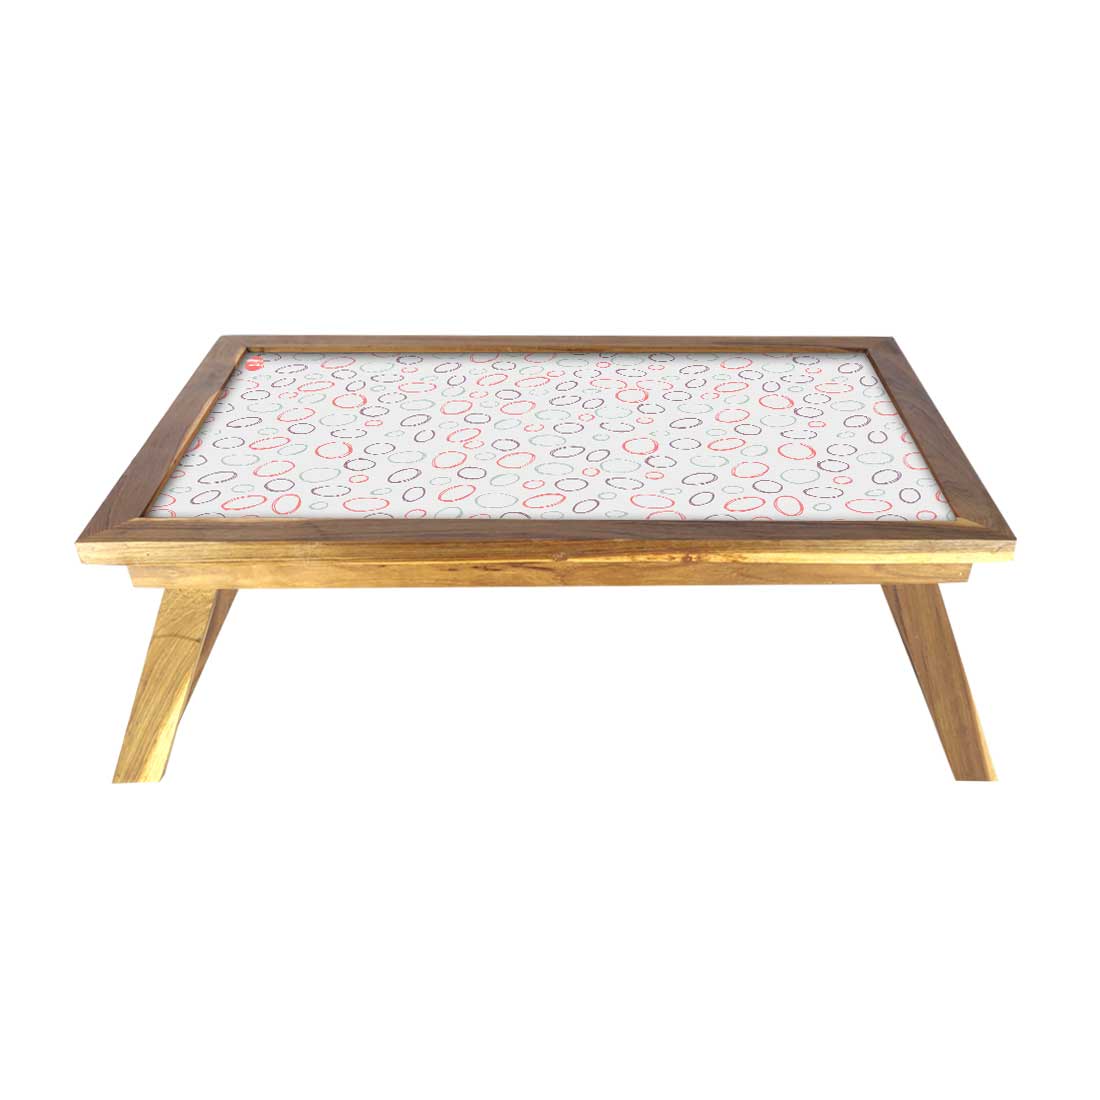 Folding Laptop Desk for Home Bed Breakfast Table Wooden - Colorful Circle Nutcase